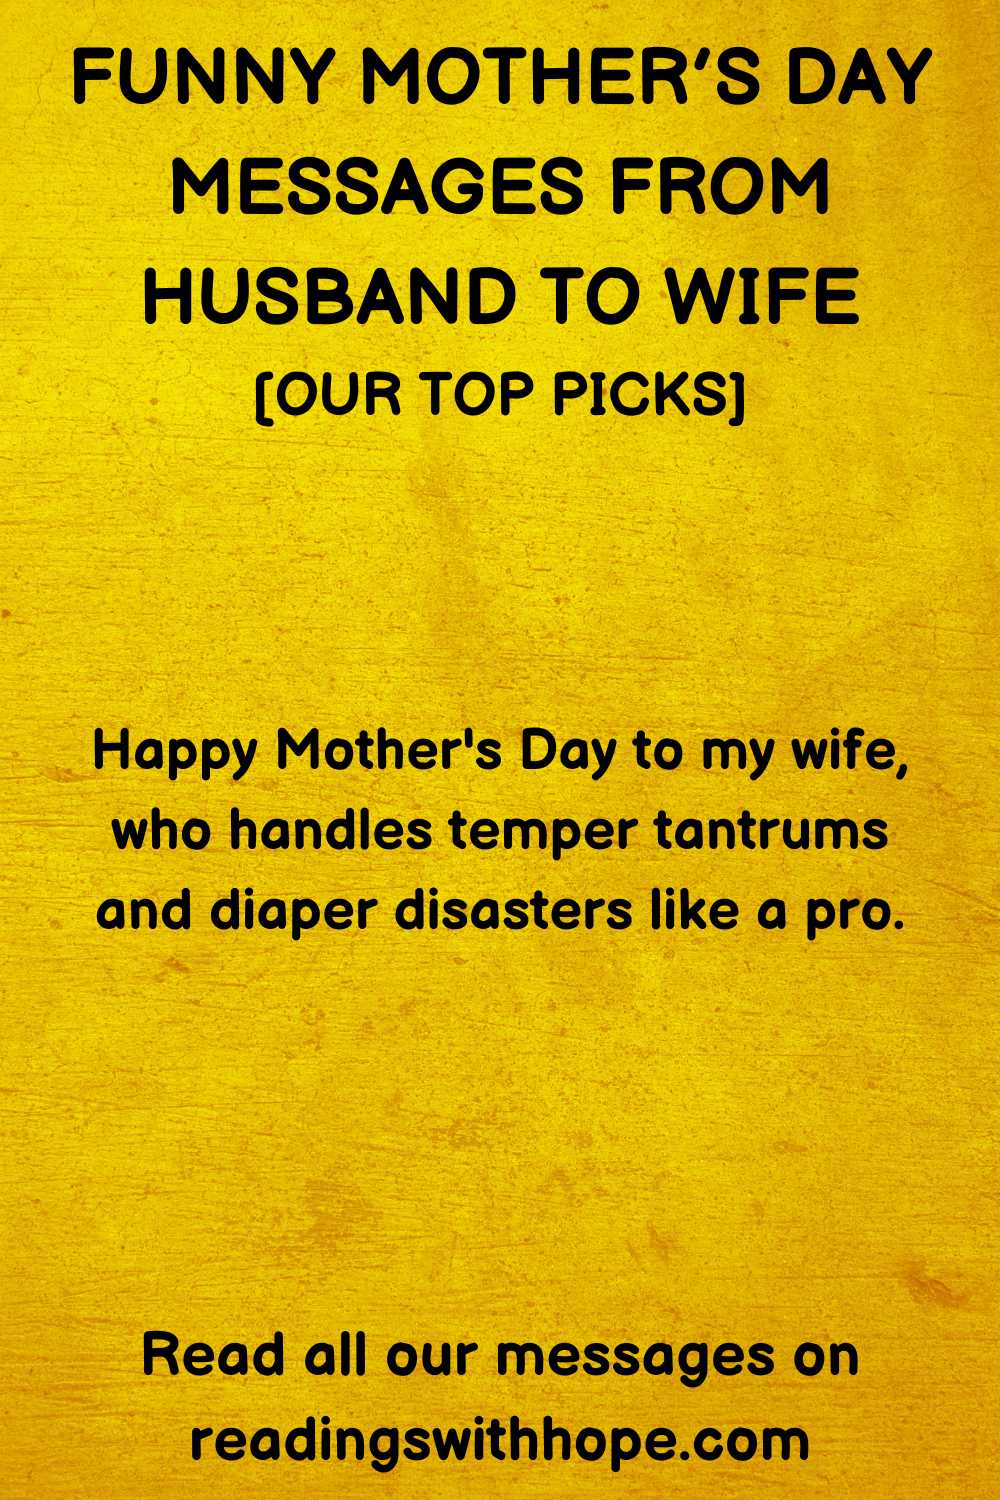 funny mother's day message from husband to wife